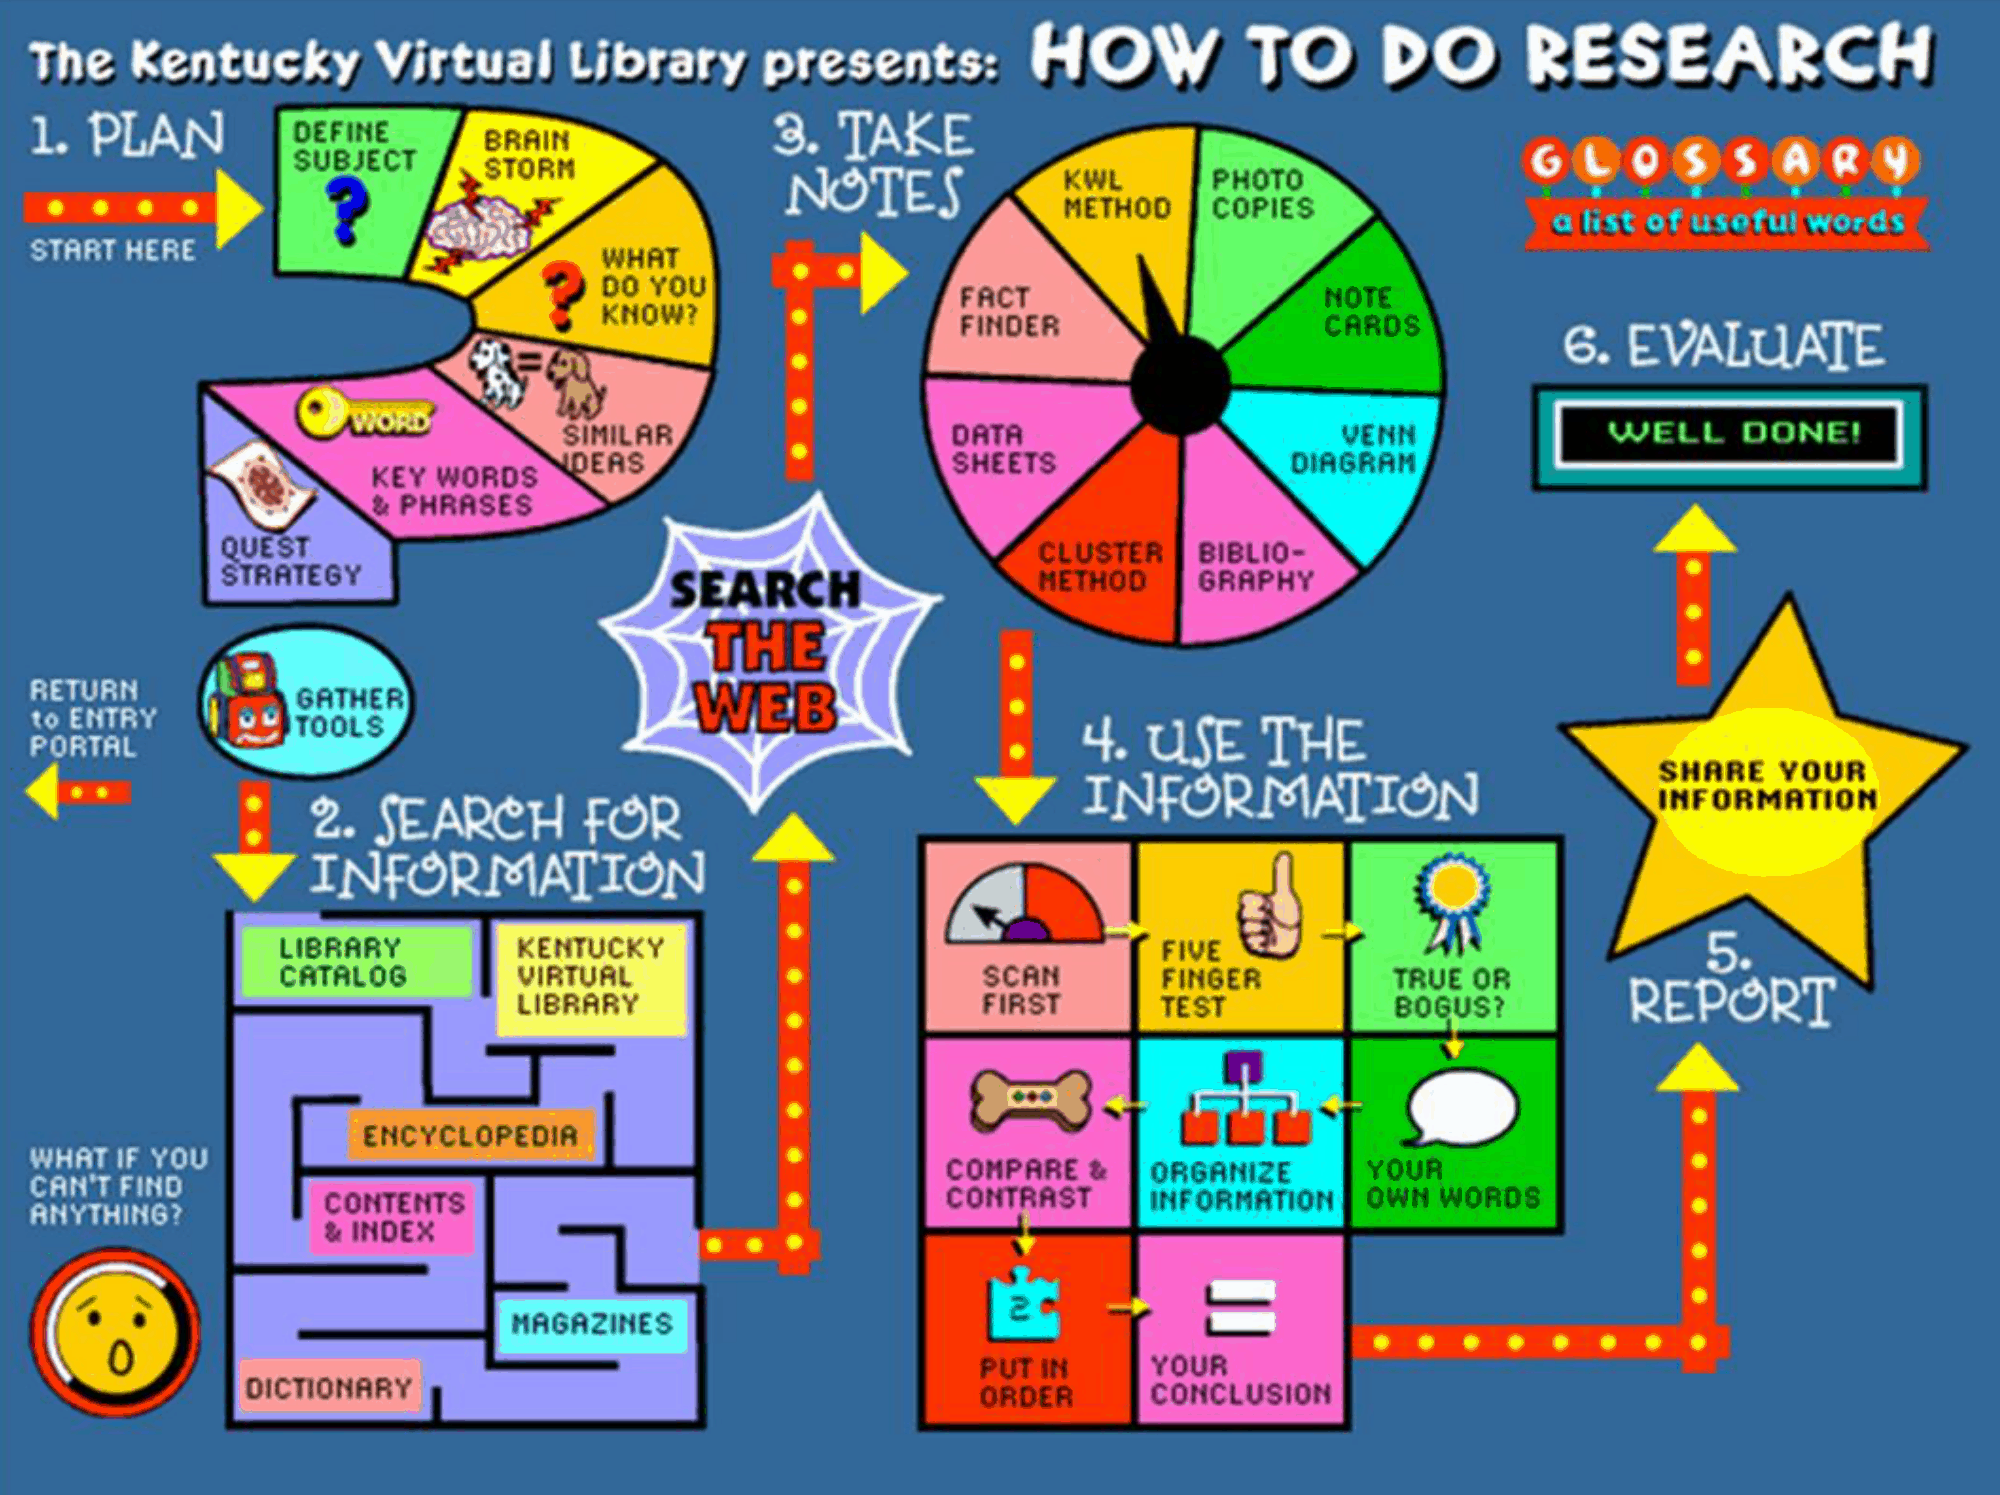 How to Do Research (KY Virtual Library)